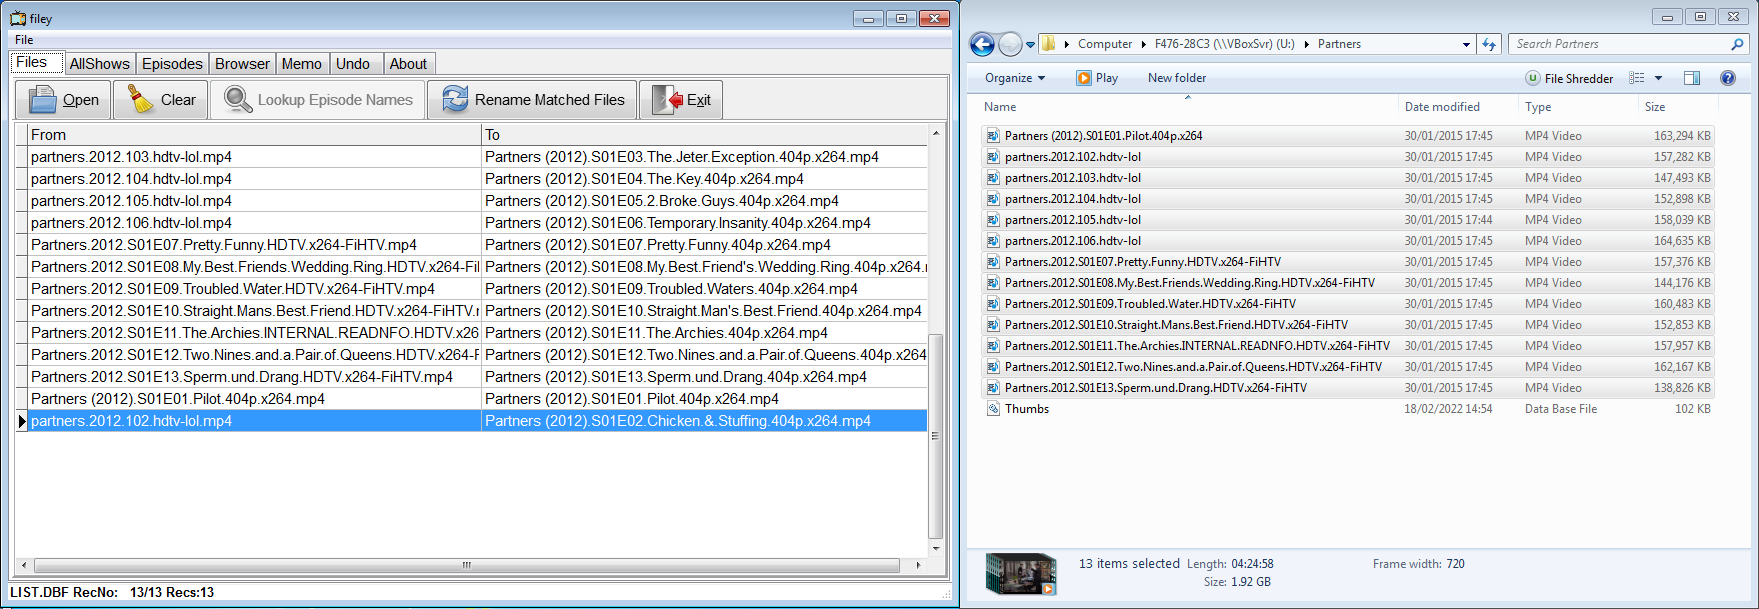 filey-Windows 7 - 03 - Looked up episode names.png